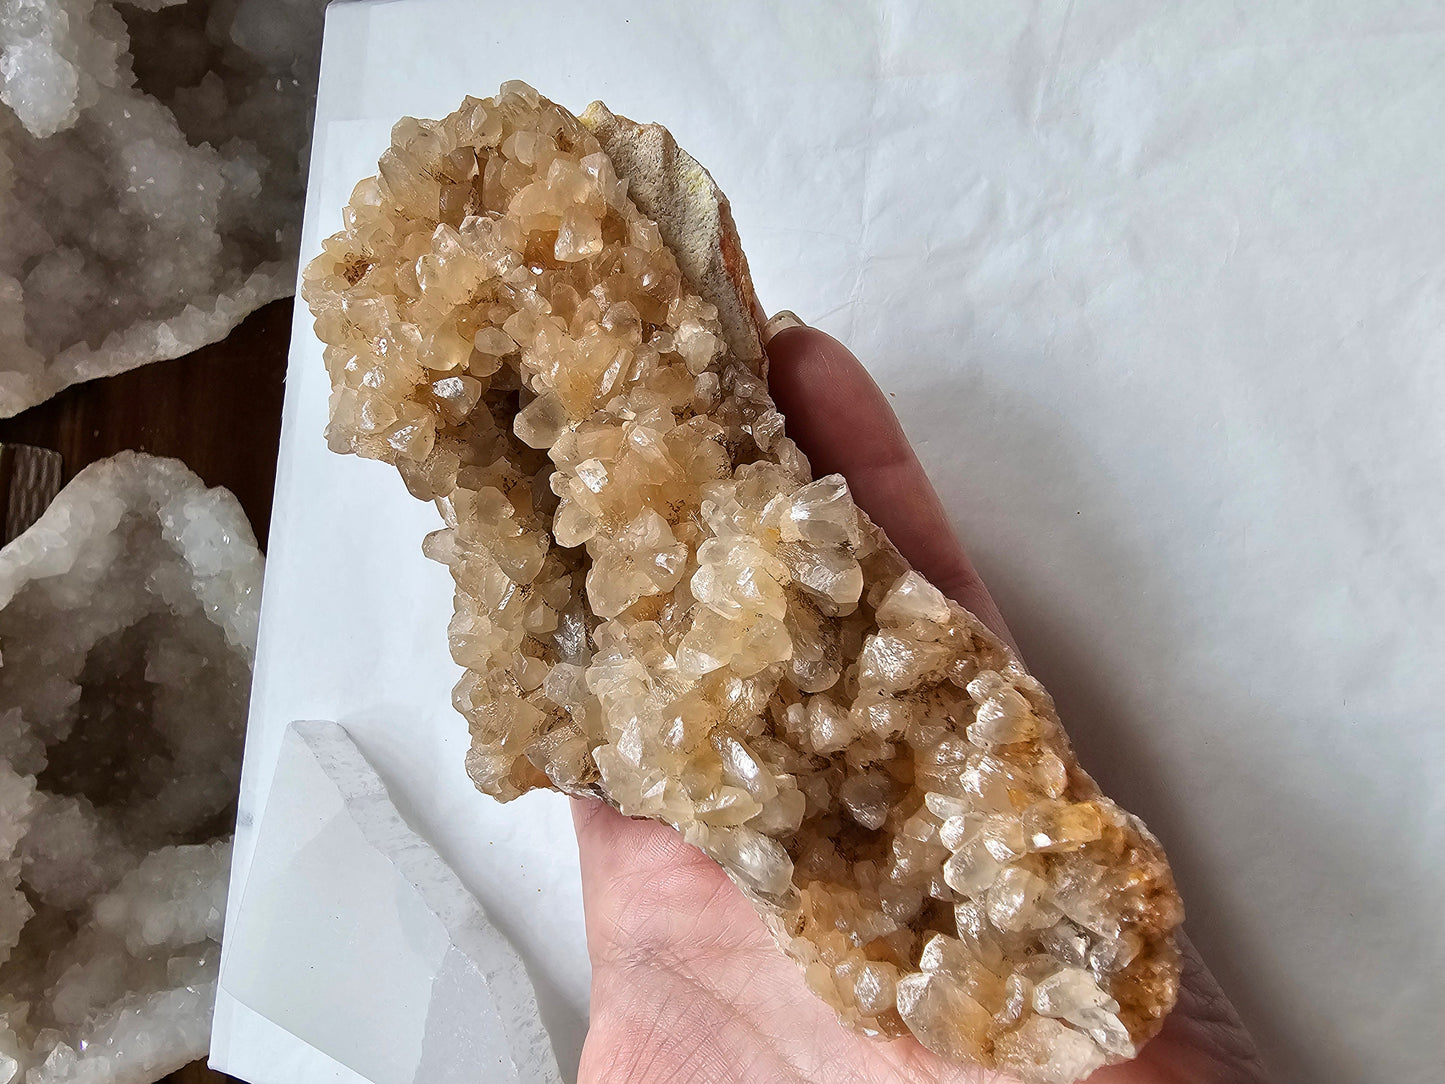 Dog tooth Calcite cluster 490g